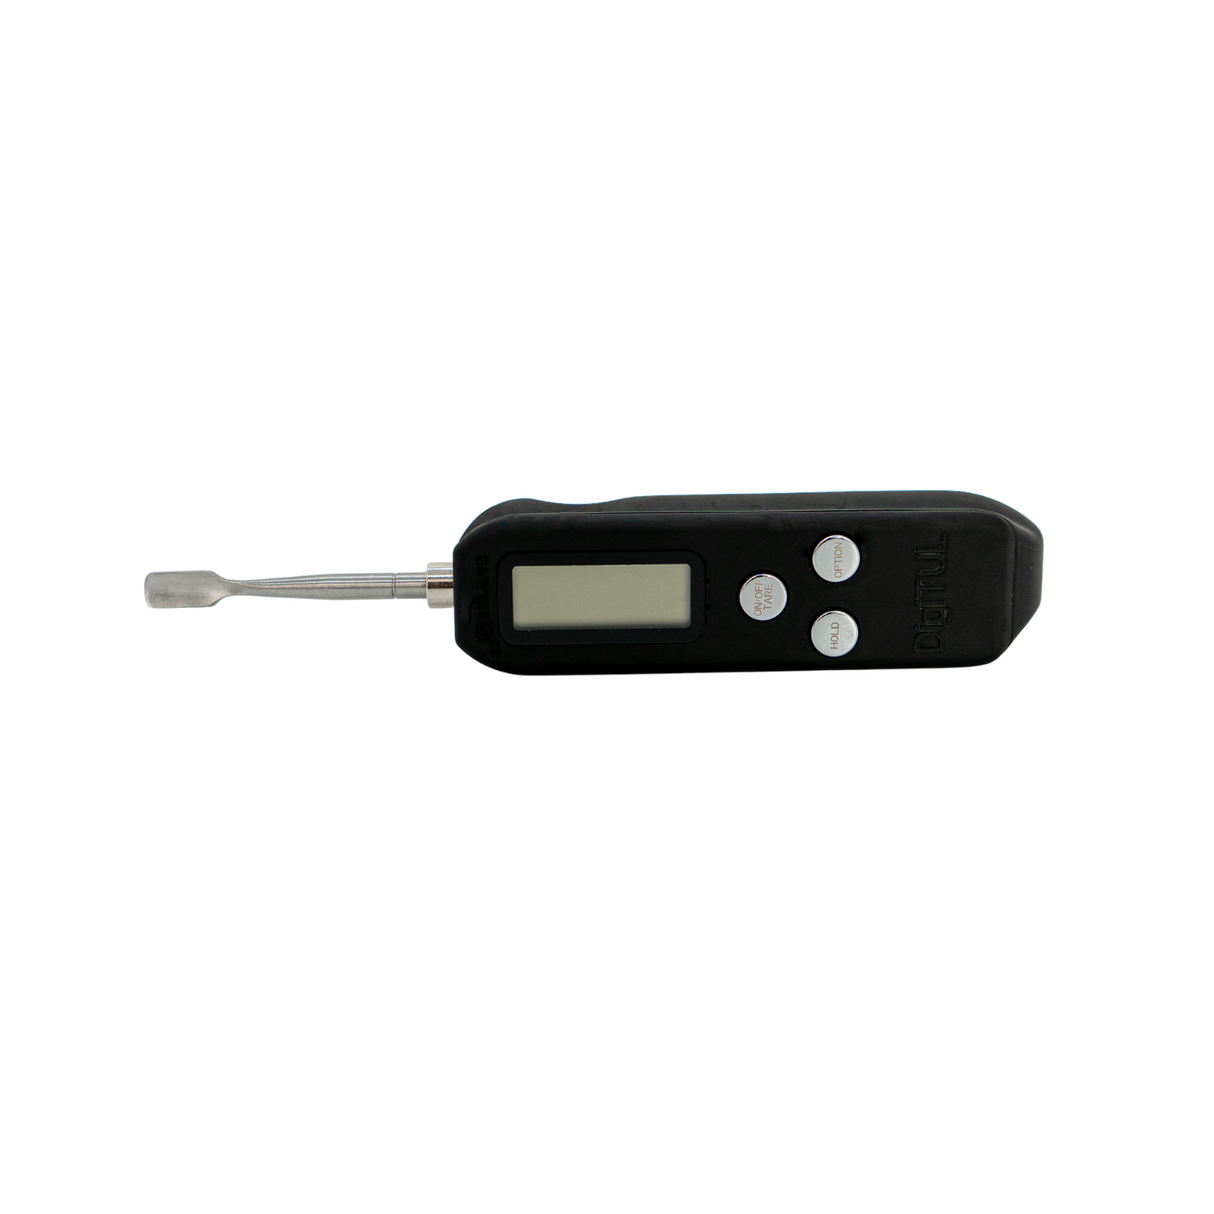 Stacheproducts DigiTül - Black Digital Tool with LCD Screen - Front View